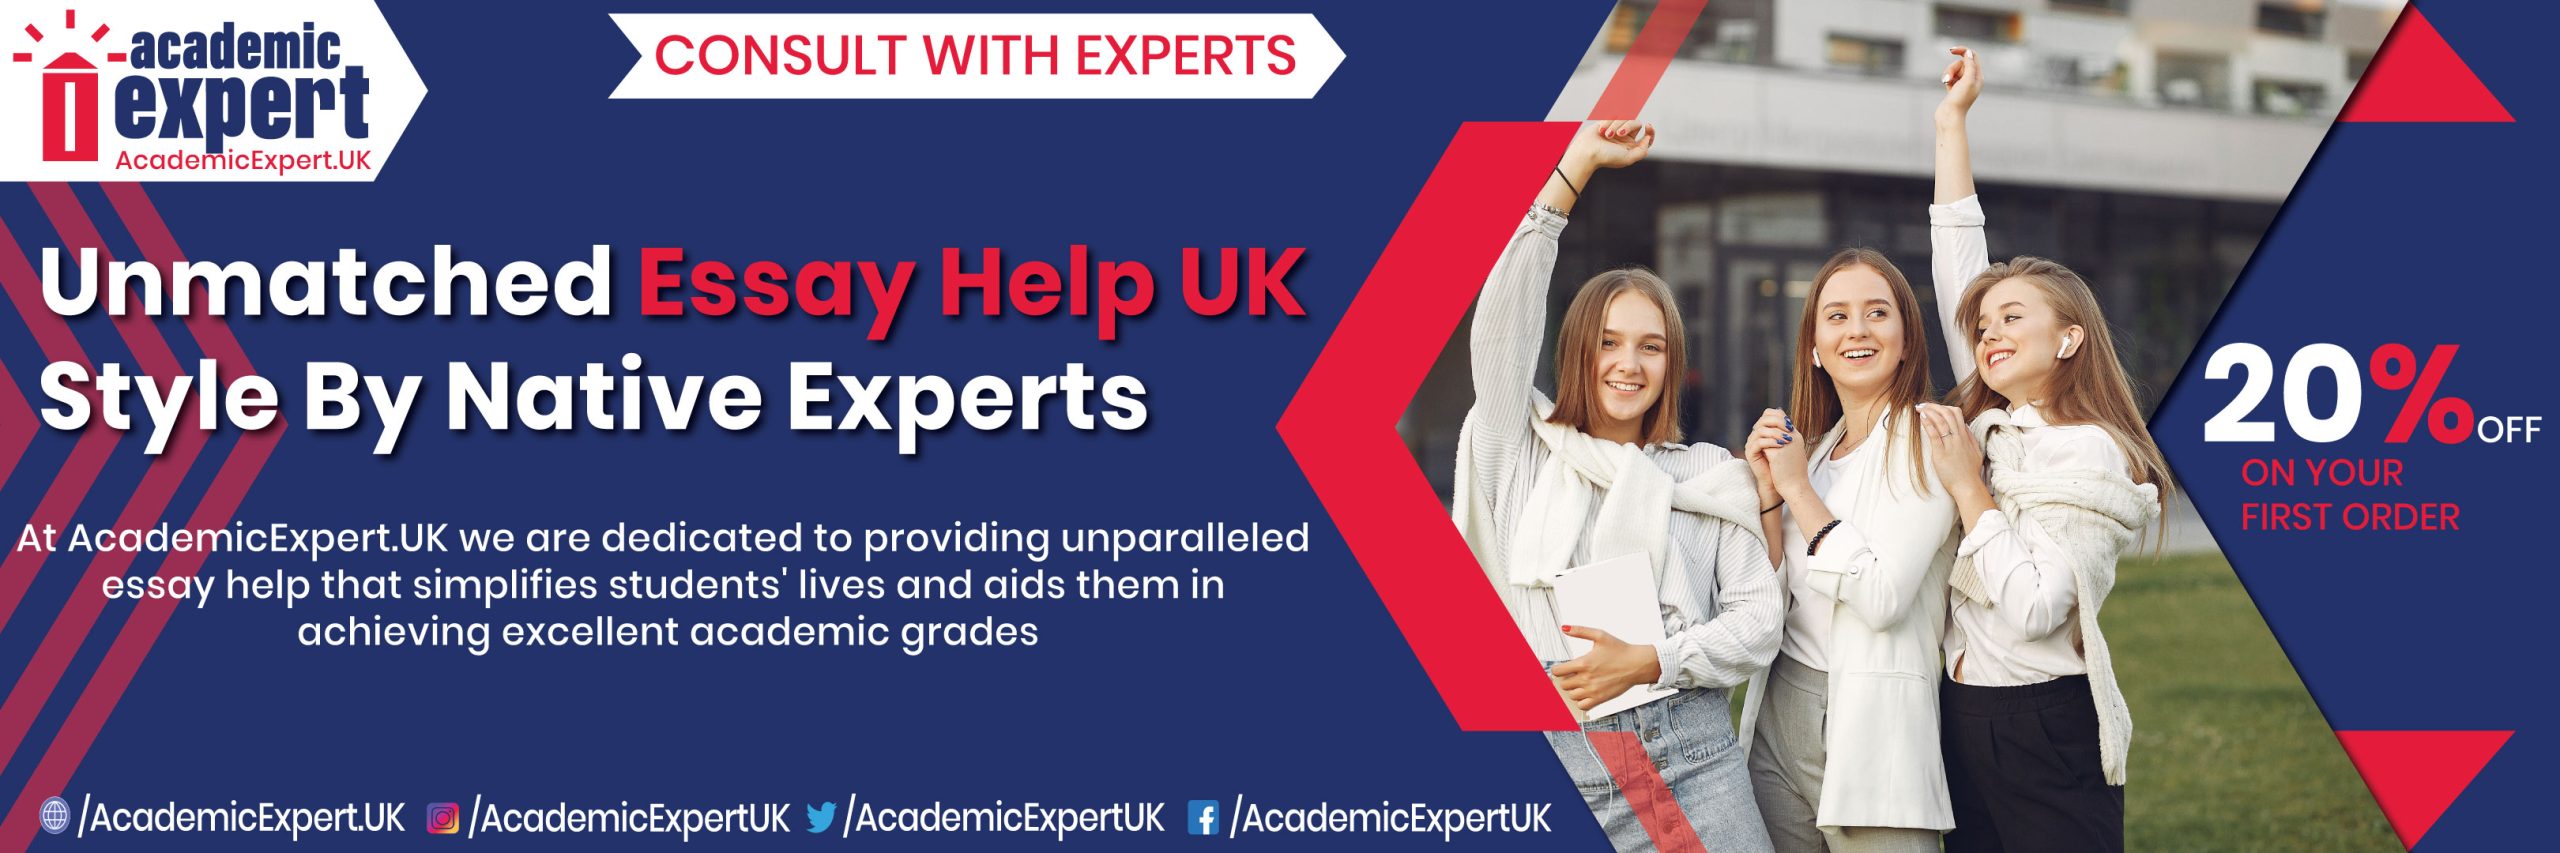 UNMATCHED ESSAY HELP UK STYLE BY NATIVE EXPERTS